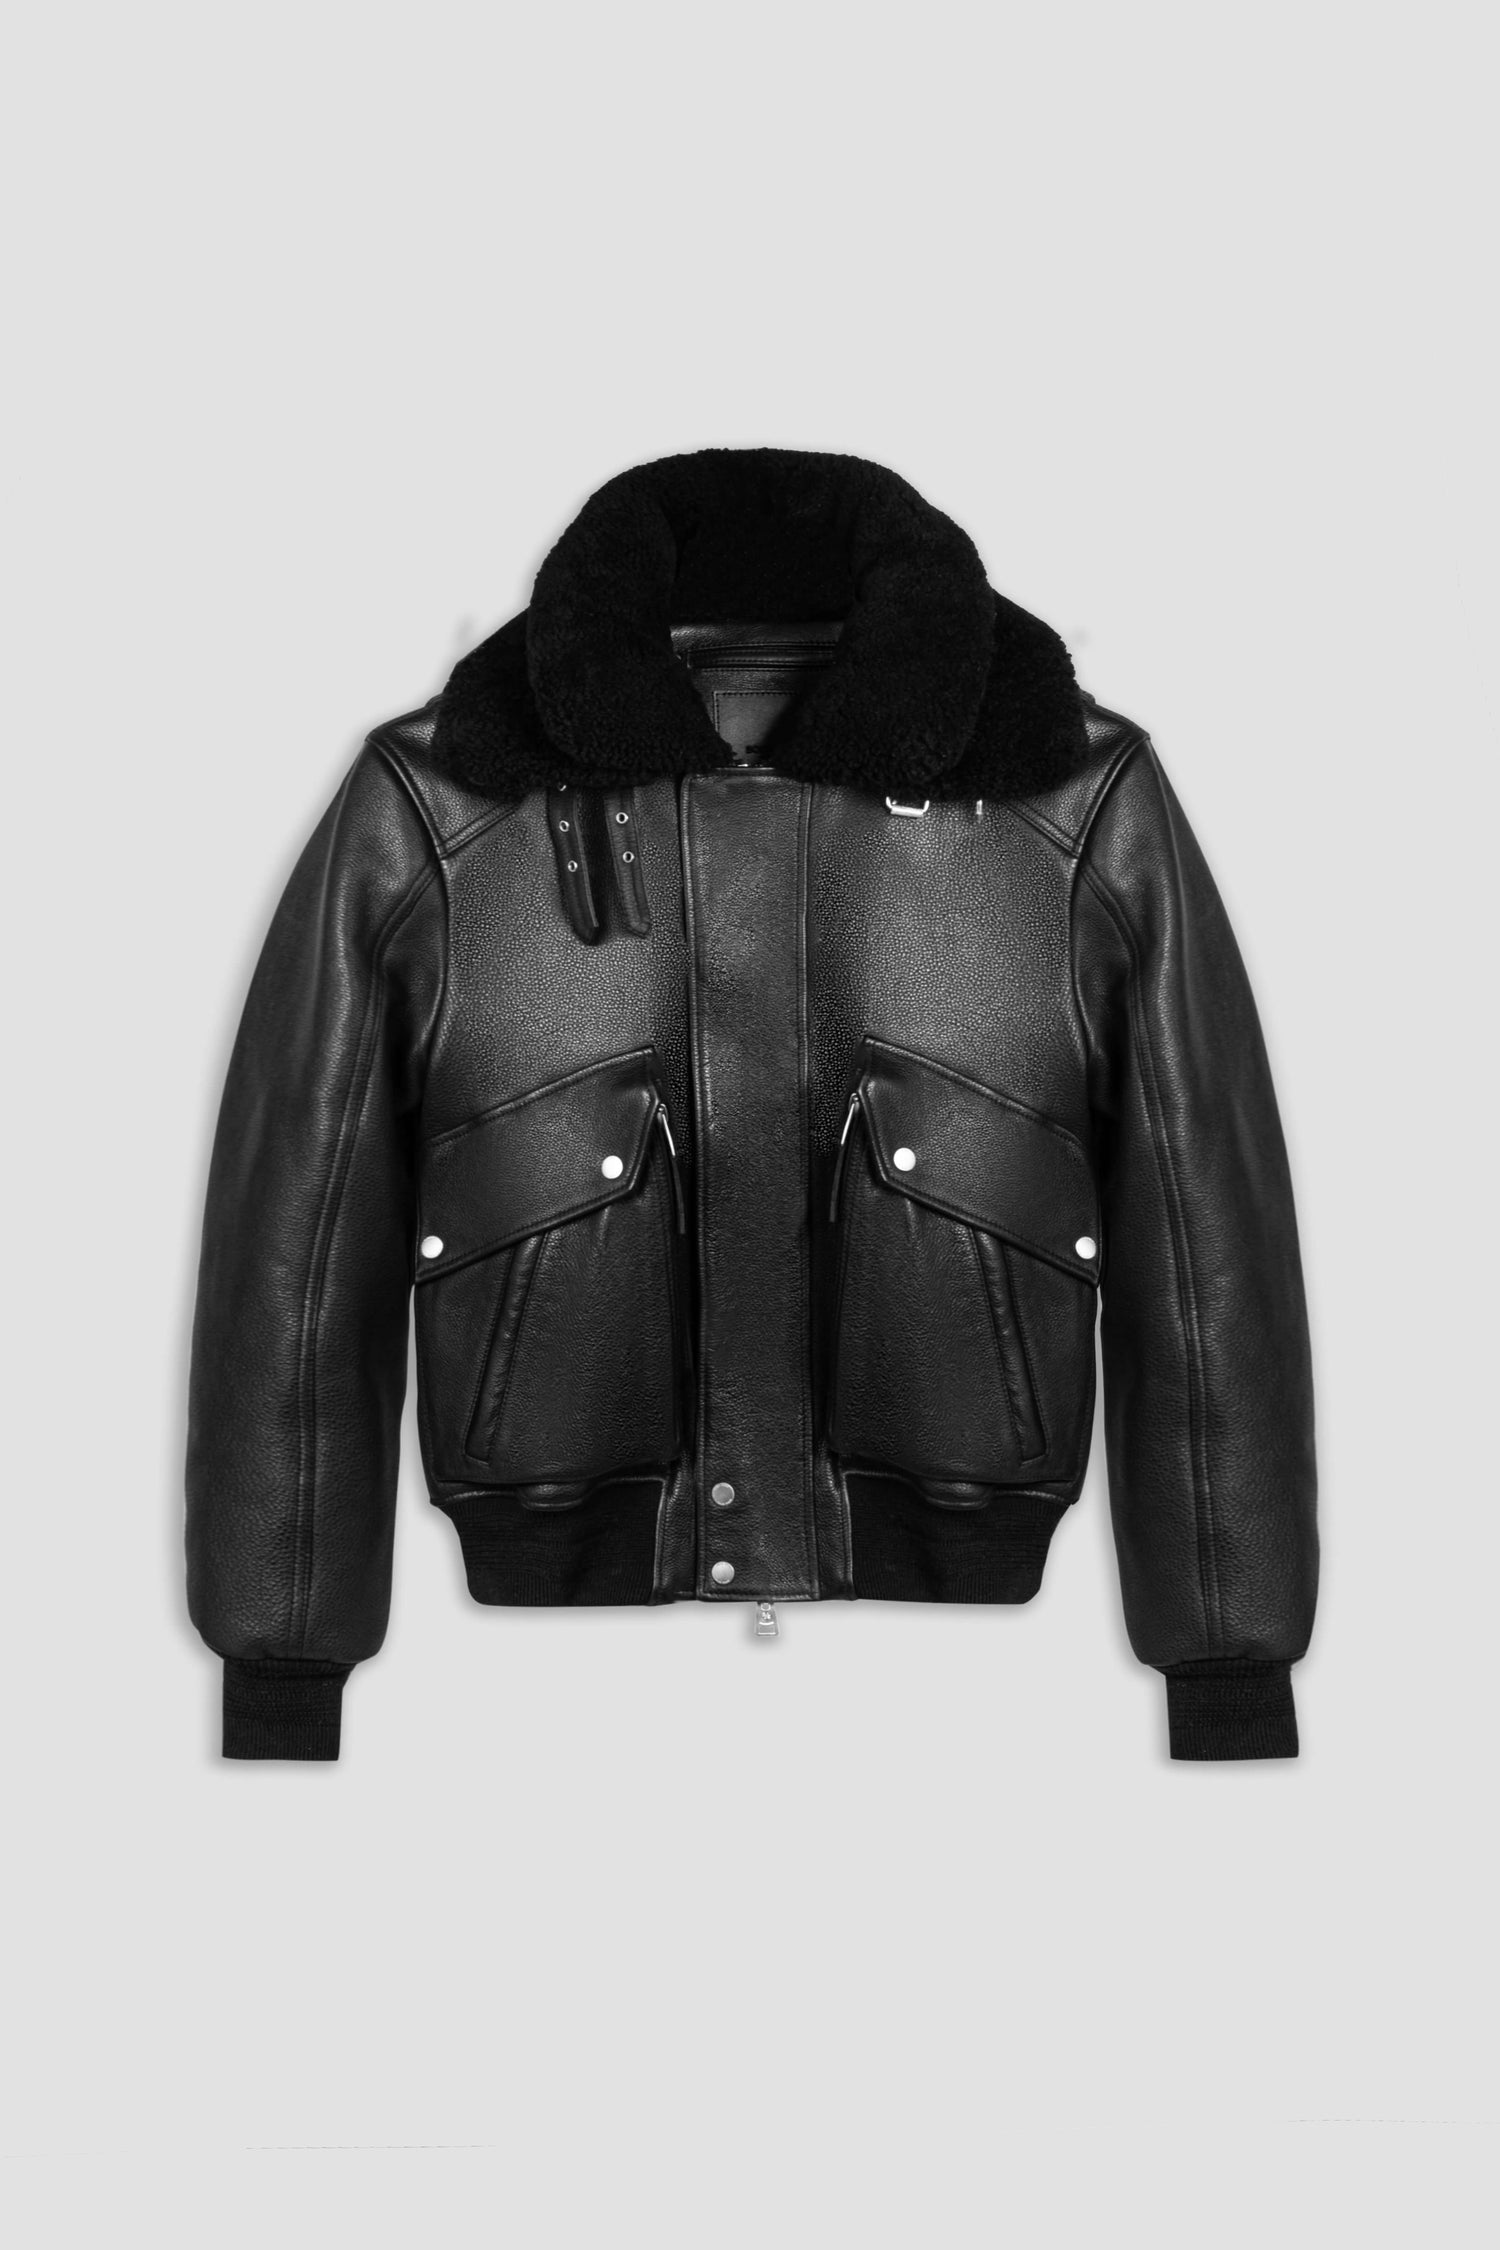 Mens Leather Jackets - By Price: Highest to Lowest